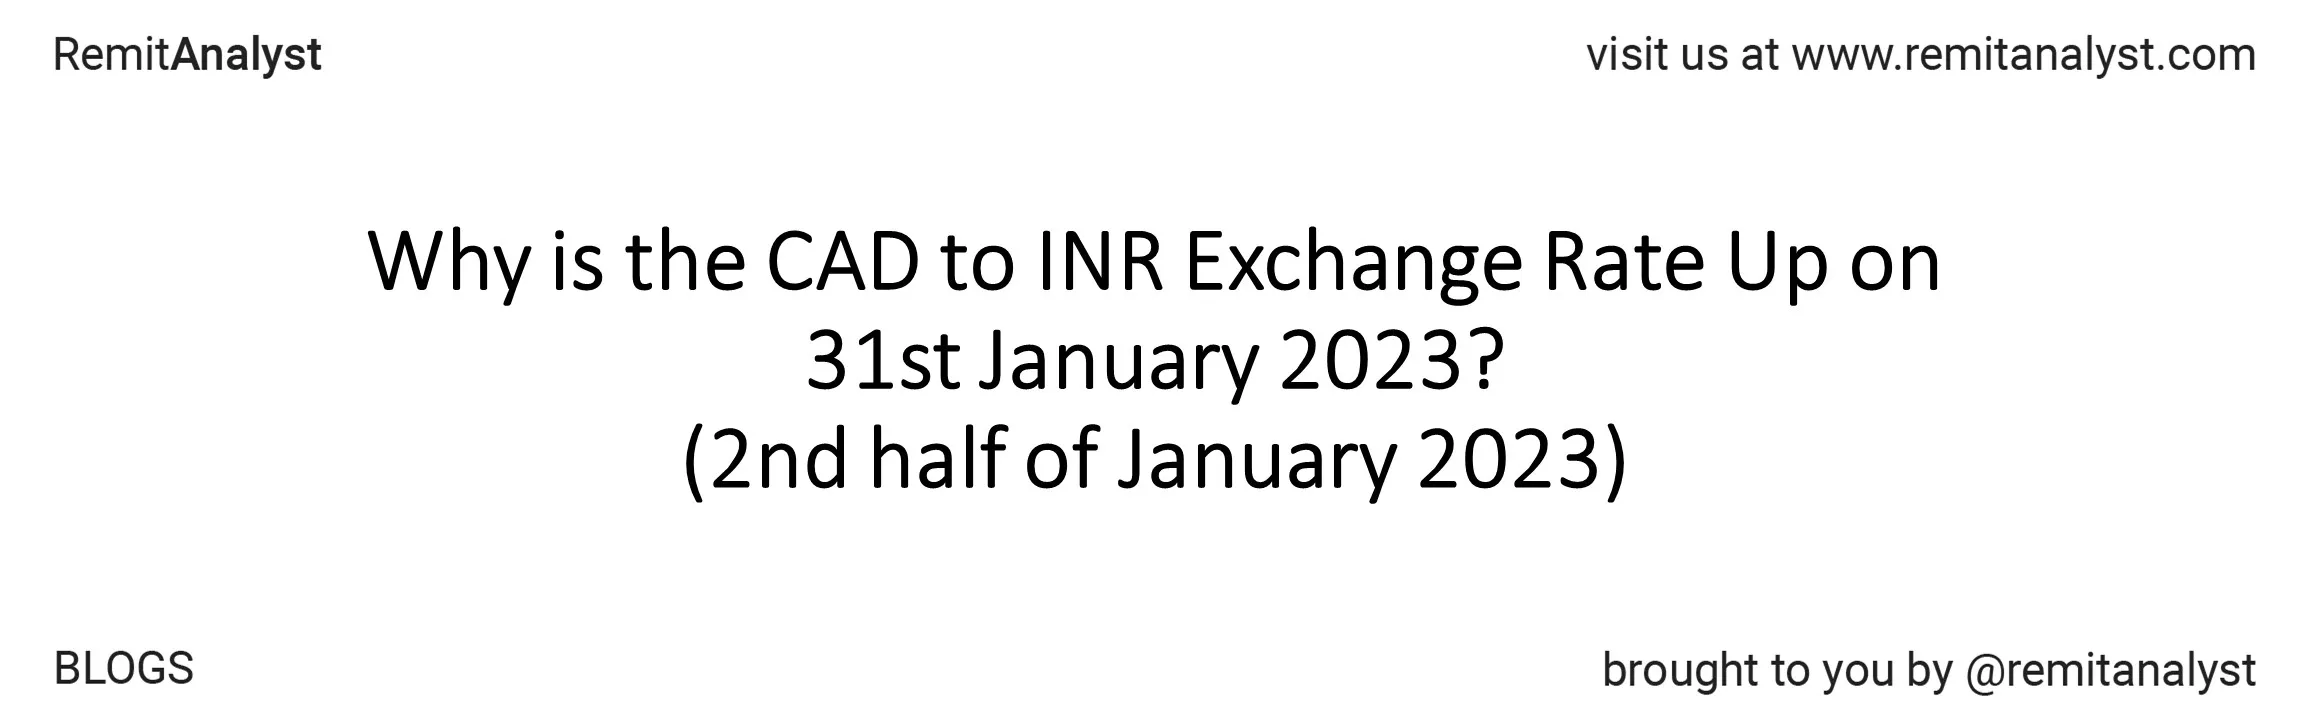 cad-to-inr-exchange-rate-from-16-jan-2023-to-31-jan-2023-title